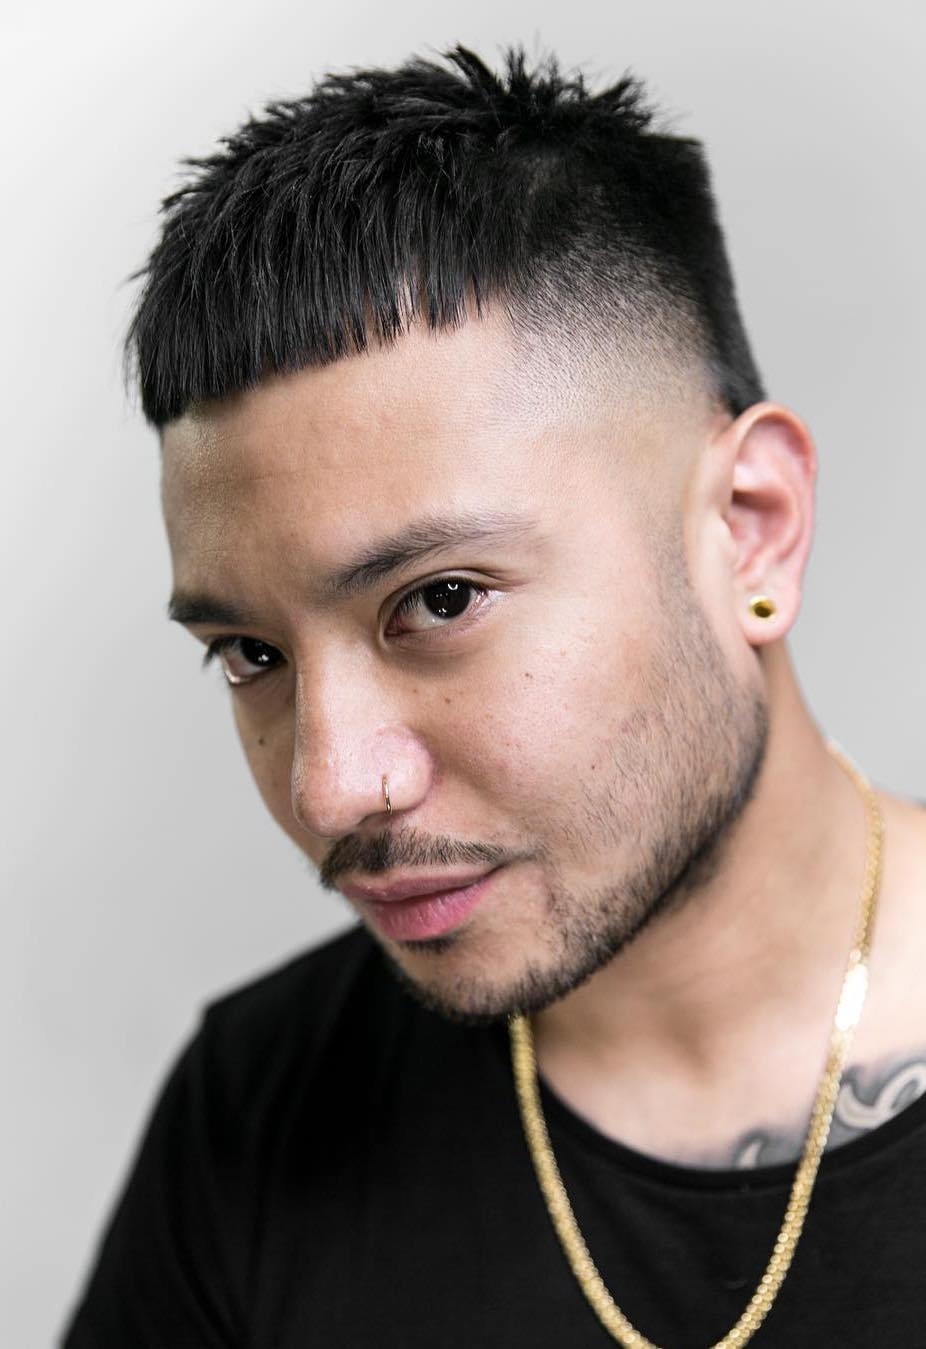 Top 30 Trendy Asian Men Hairstyles 2019 with regard to Asian Boy Short Hairstyles